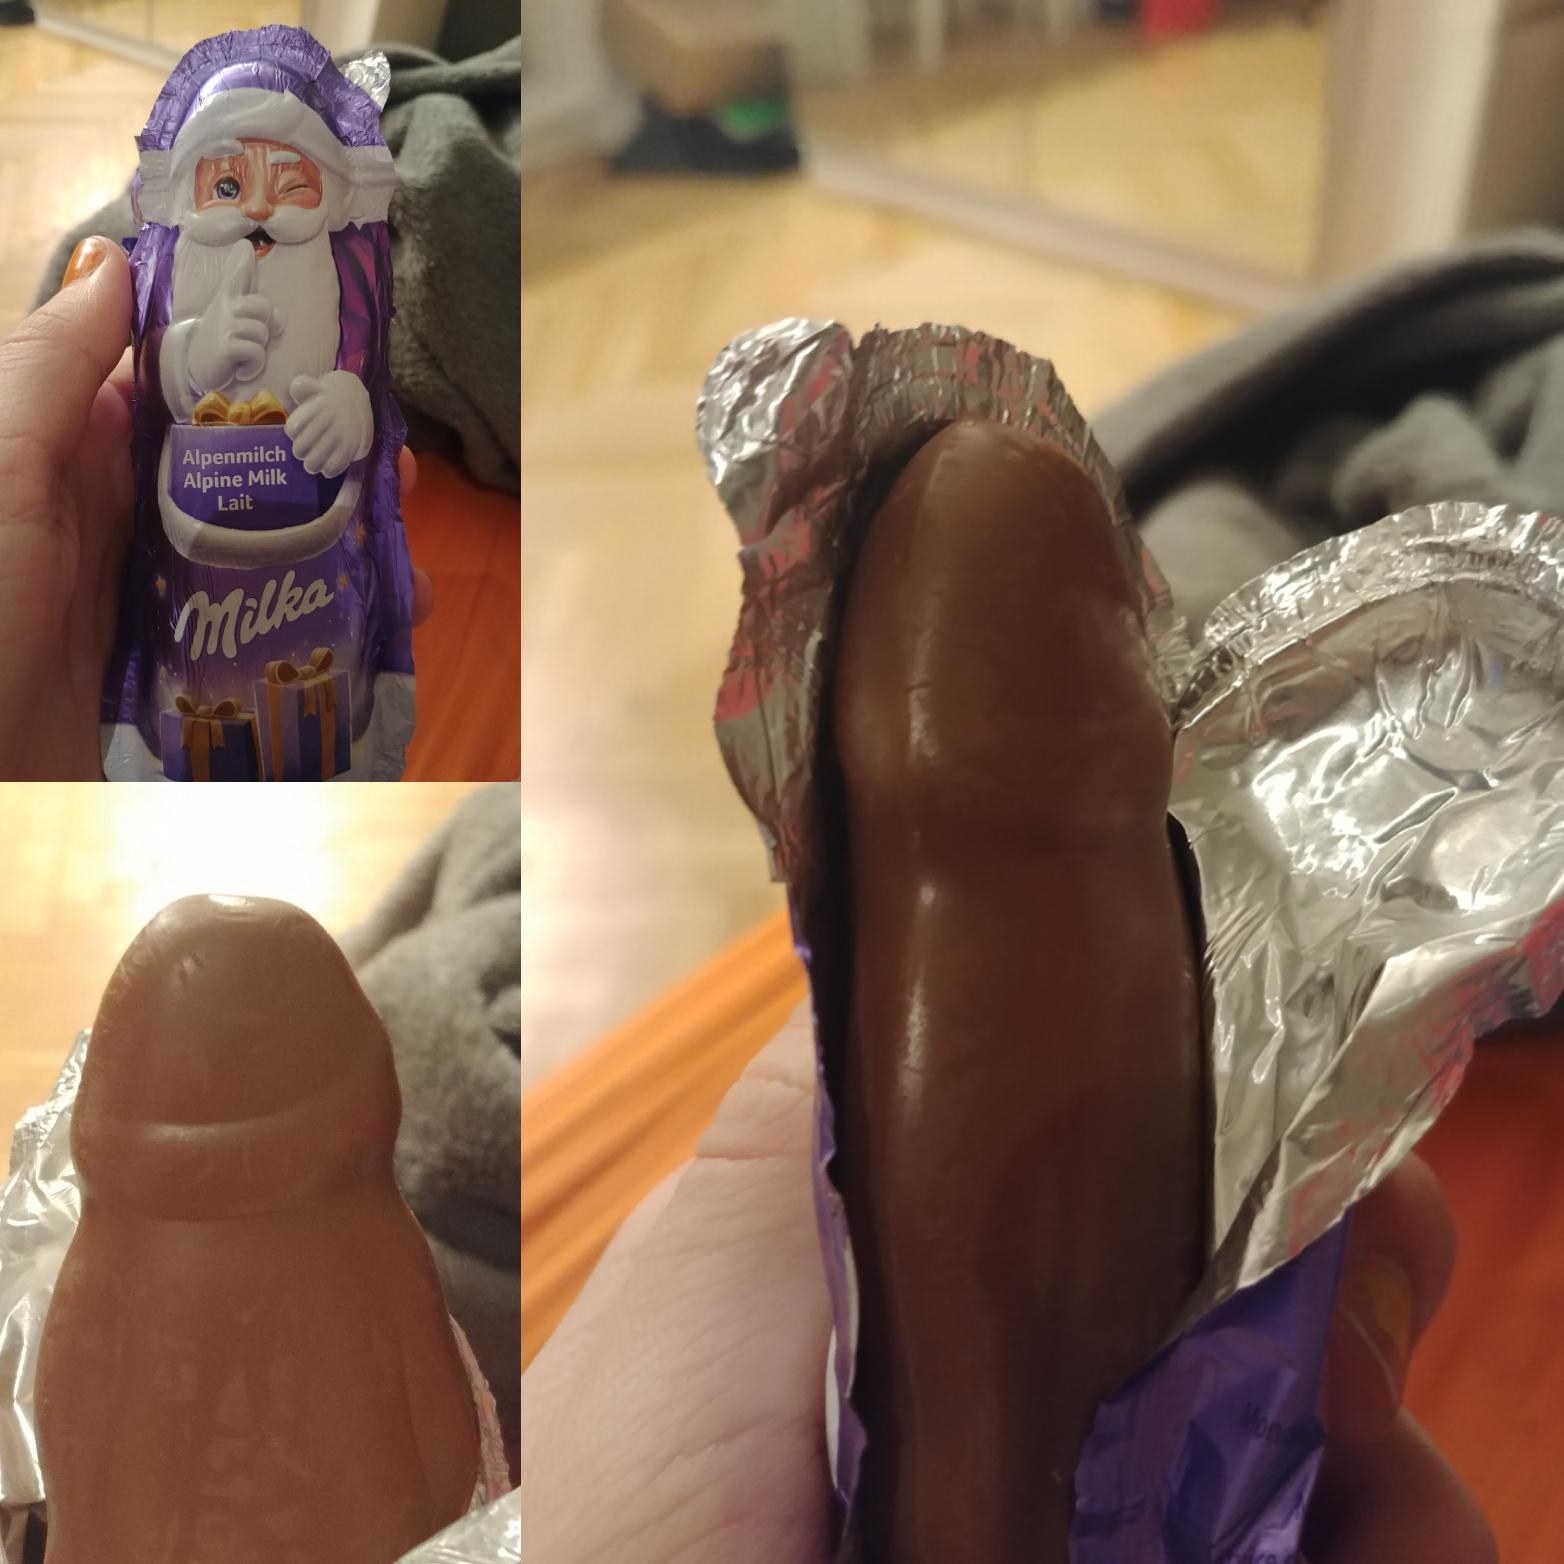 chocolate that is shaped like a penis